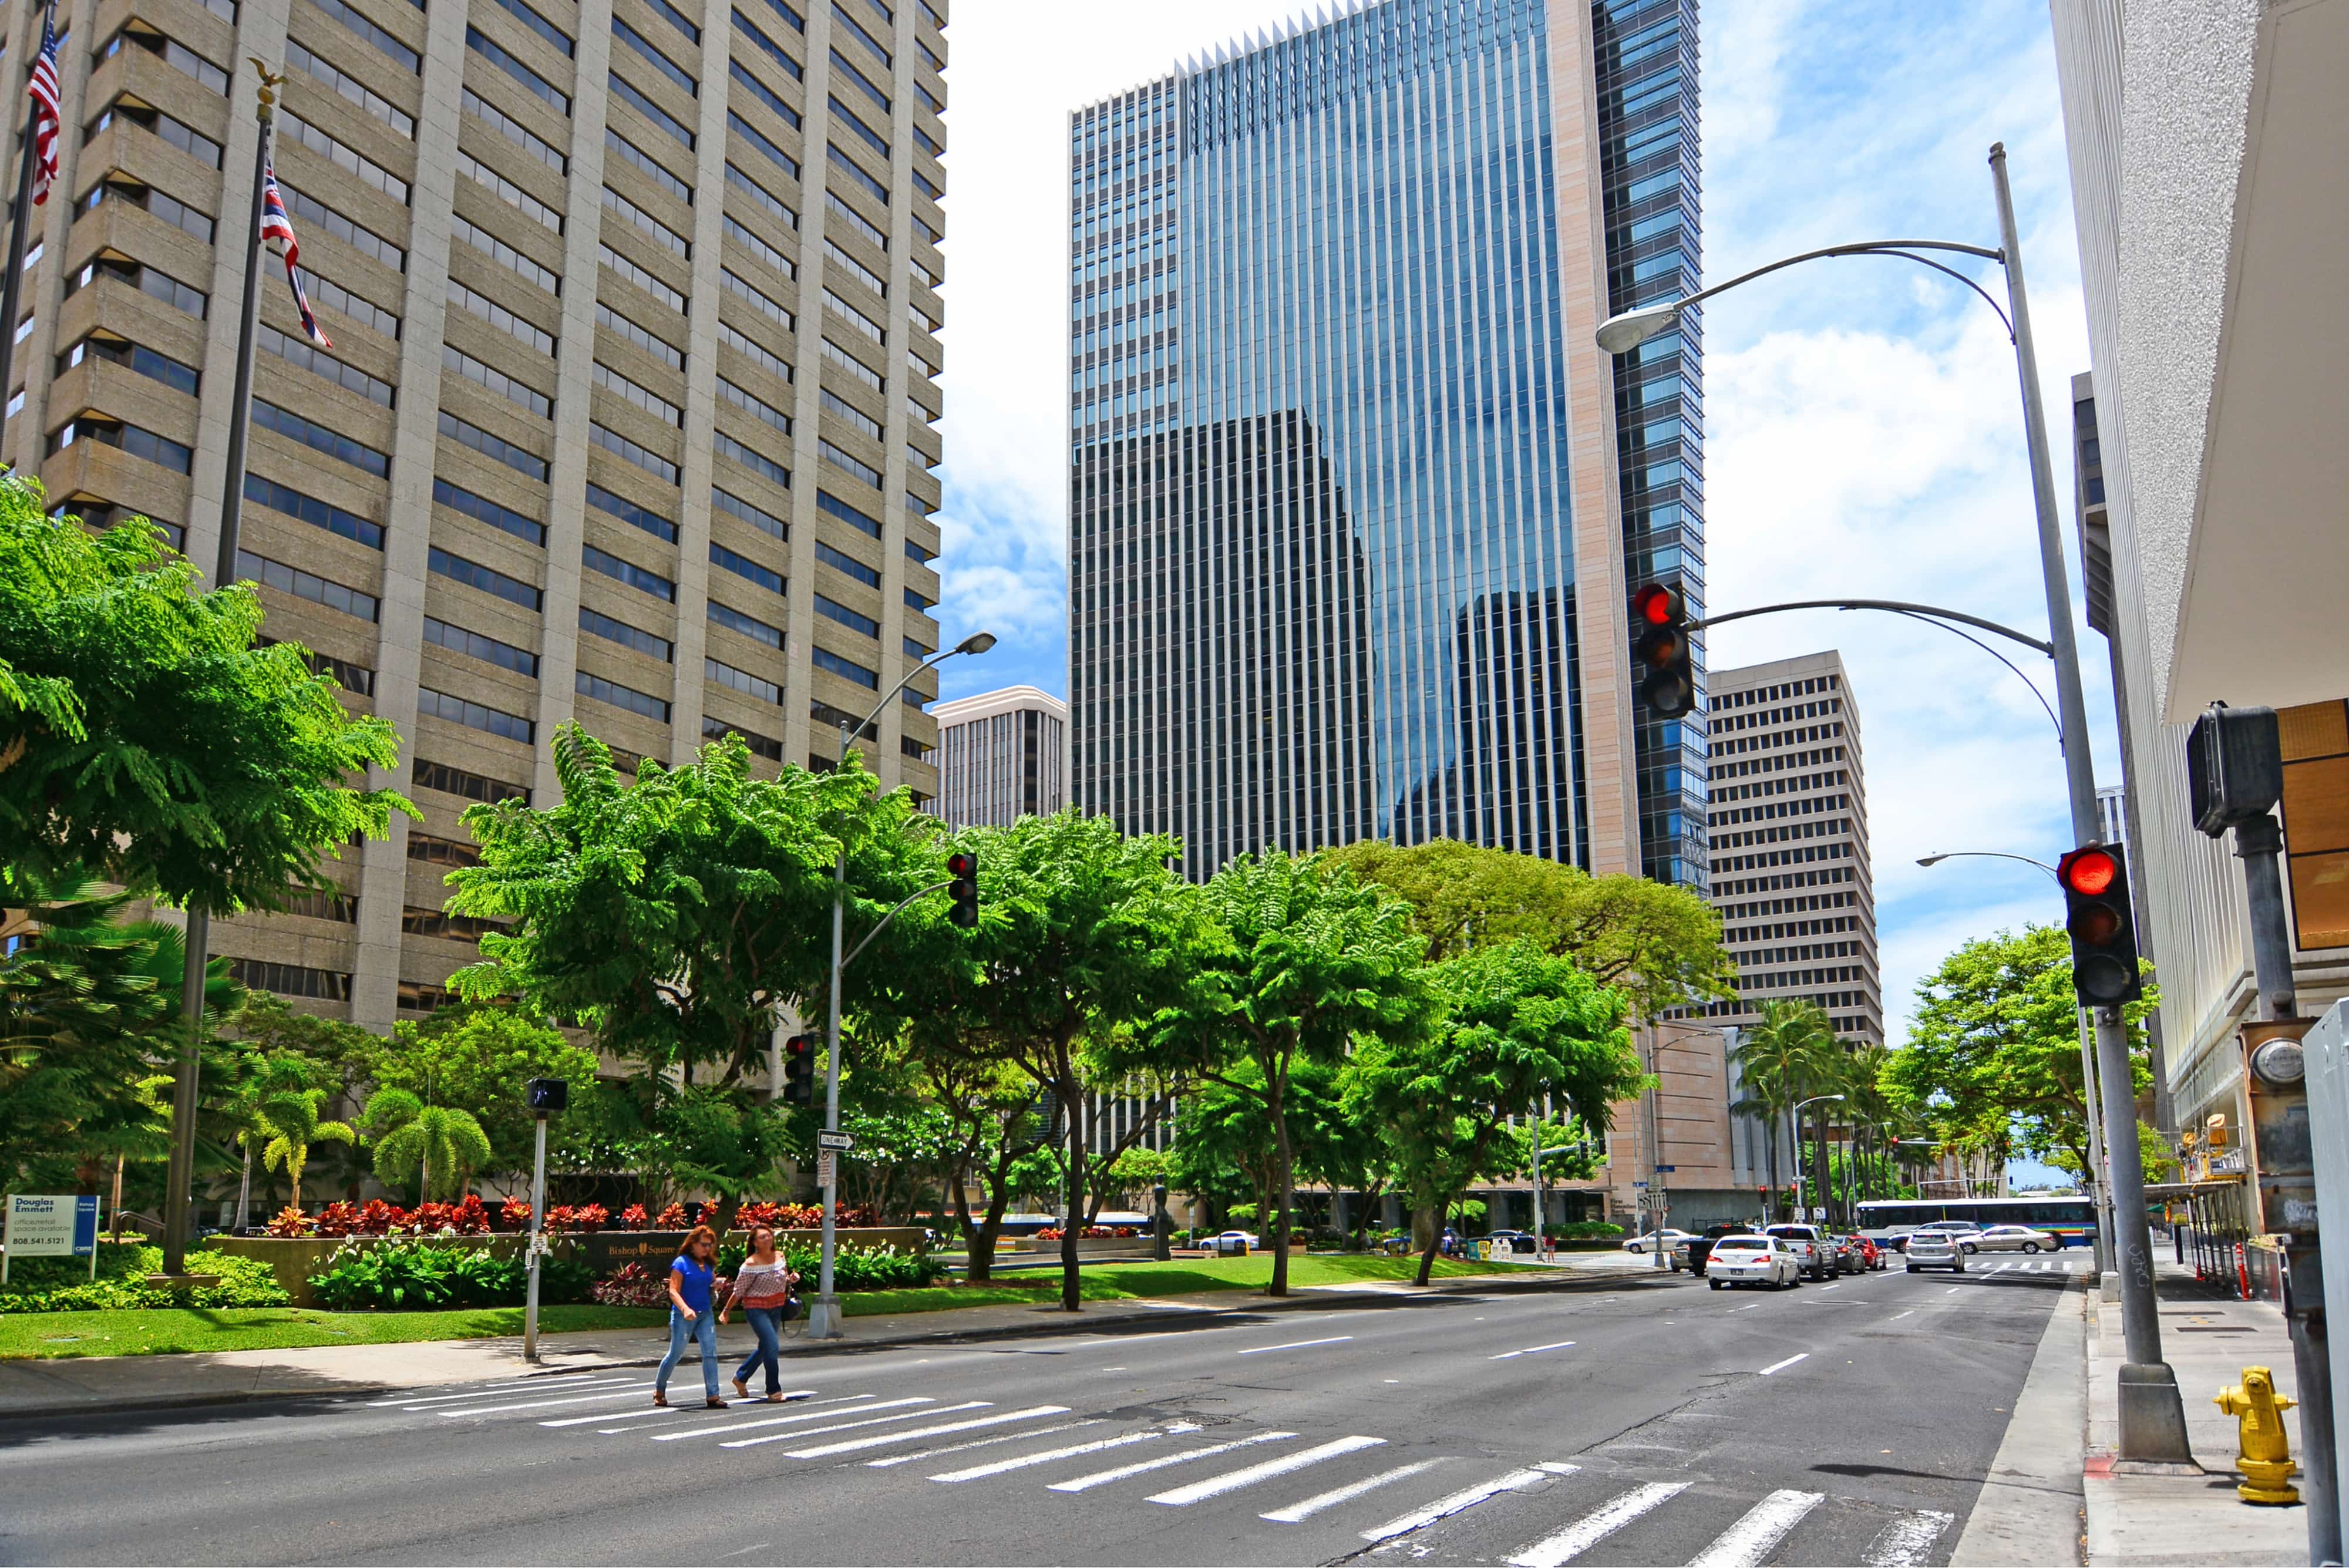 Street view of buildings in the business district of downtown Honolulu on Oahu, Hawaii